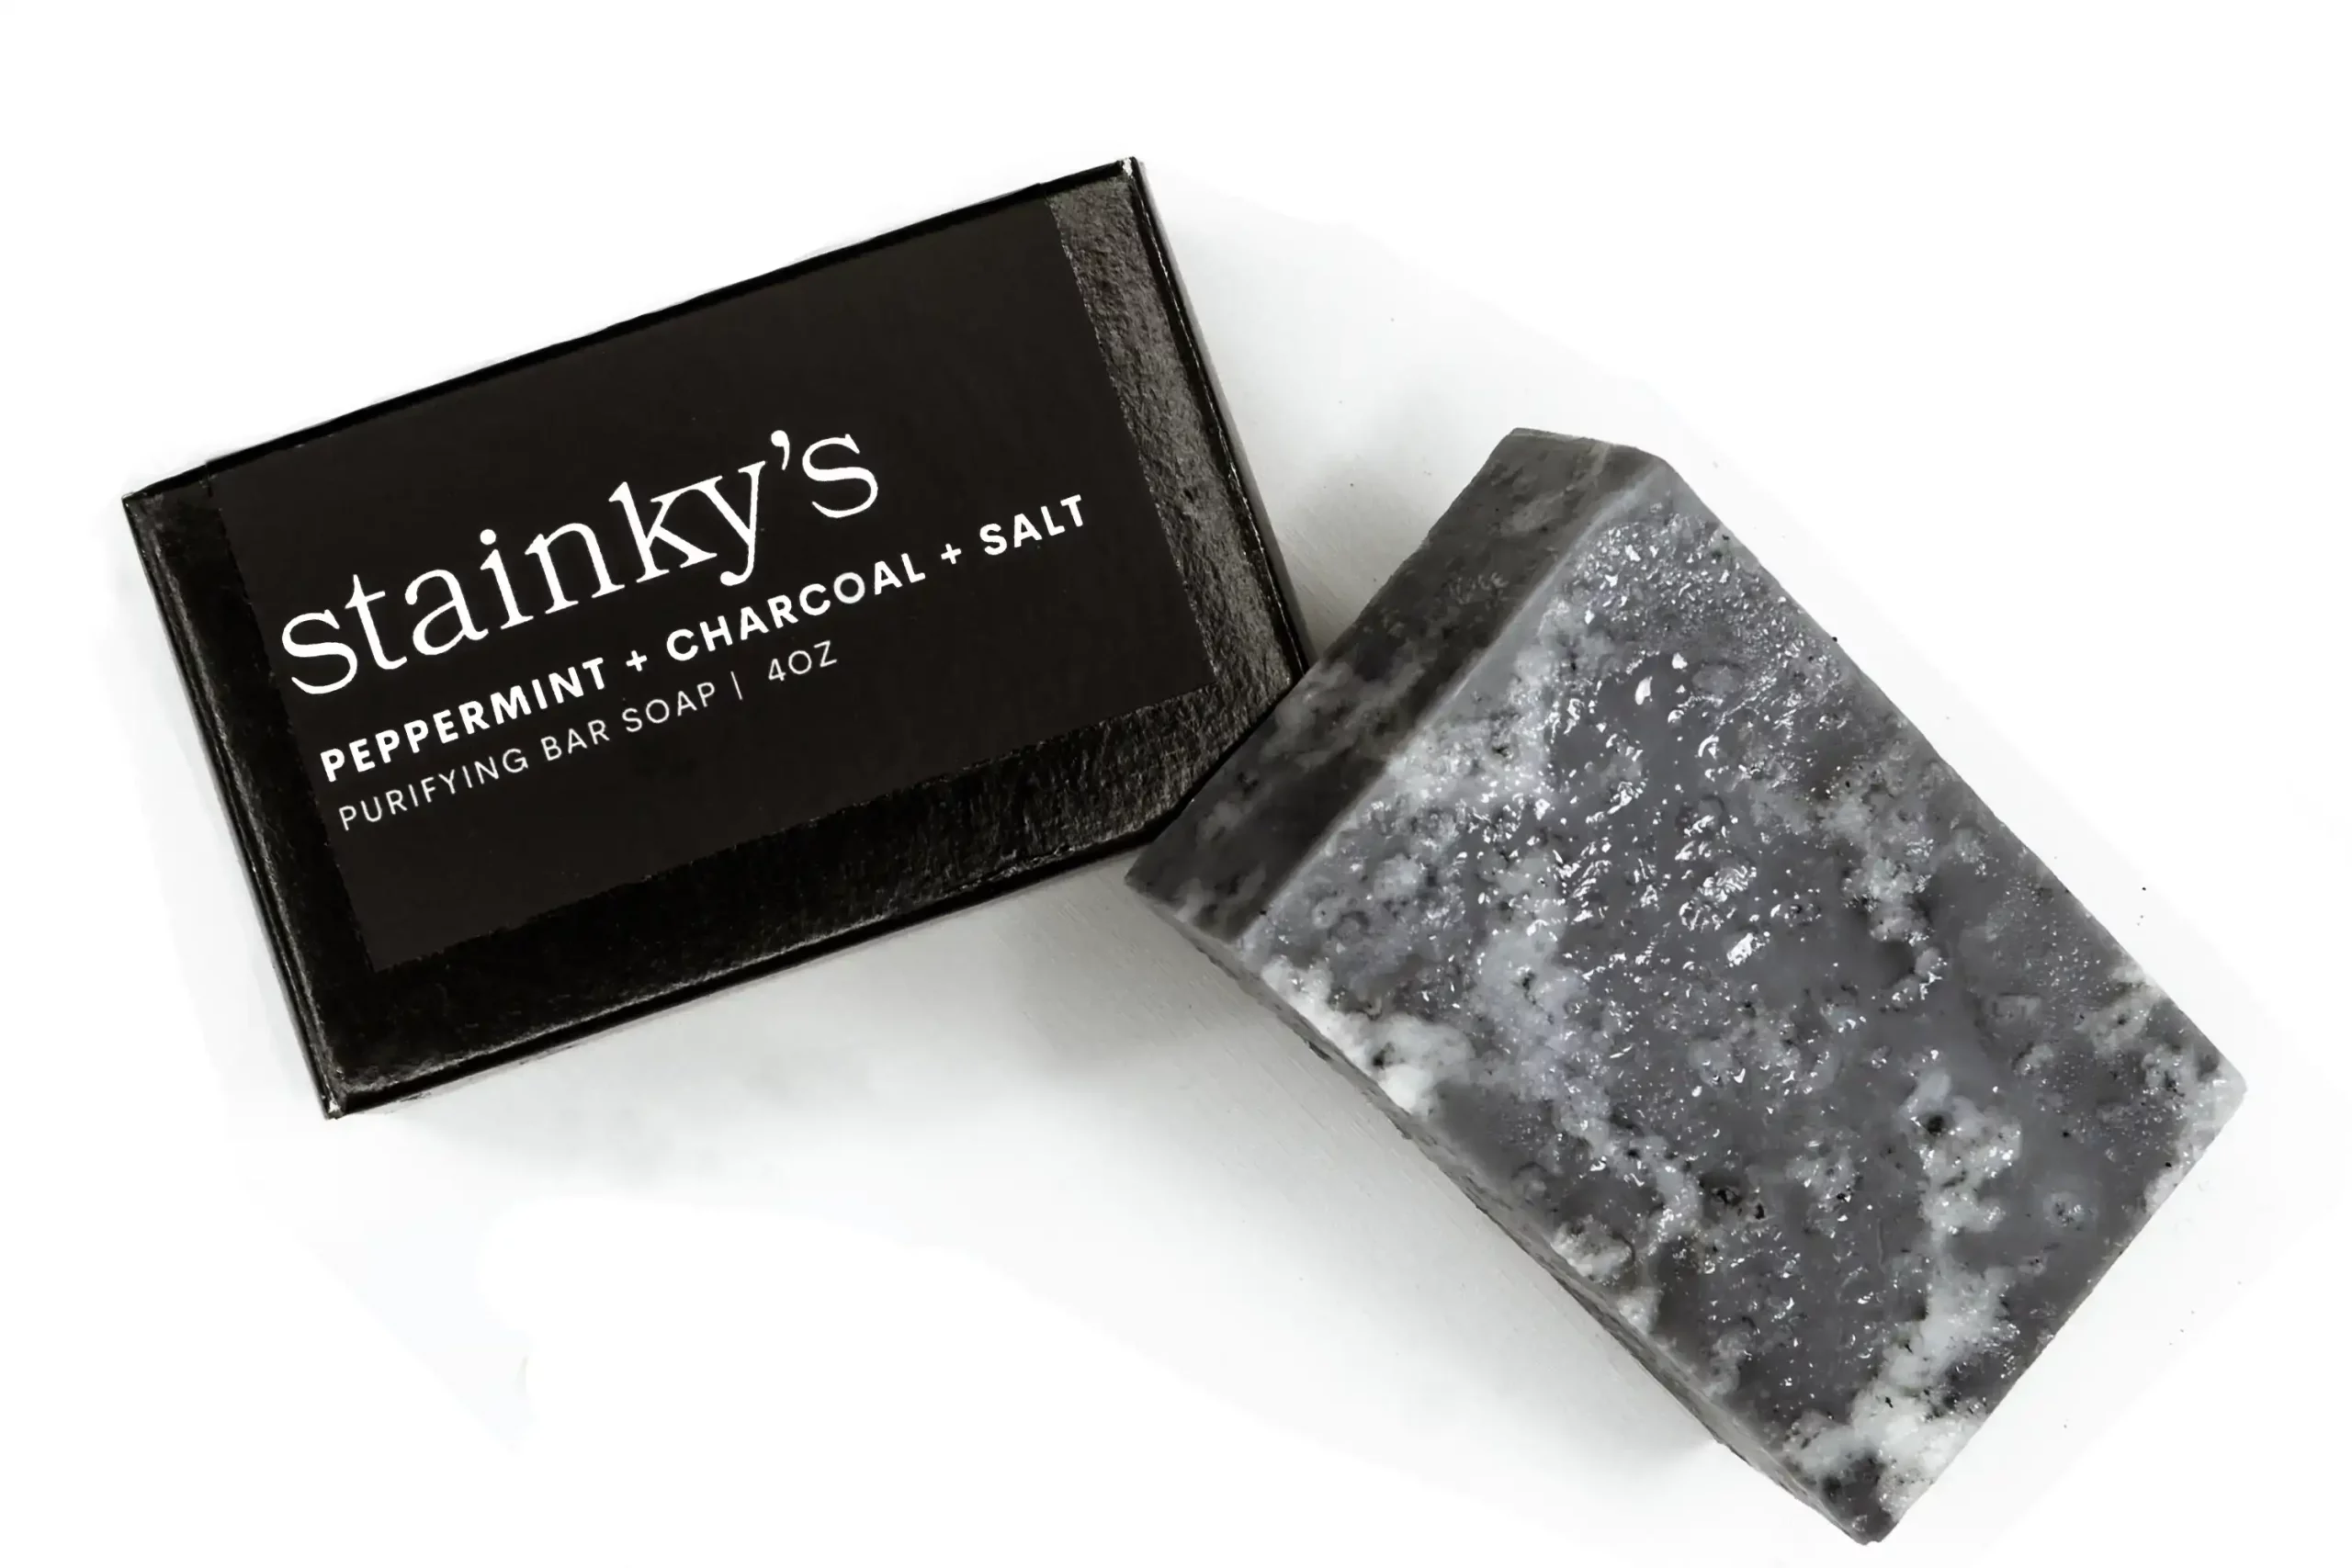 Stainky's Soap